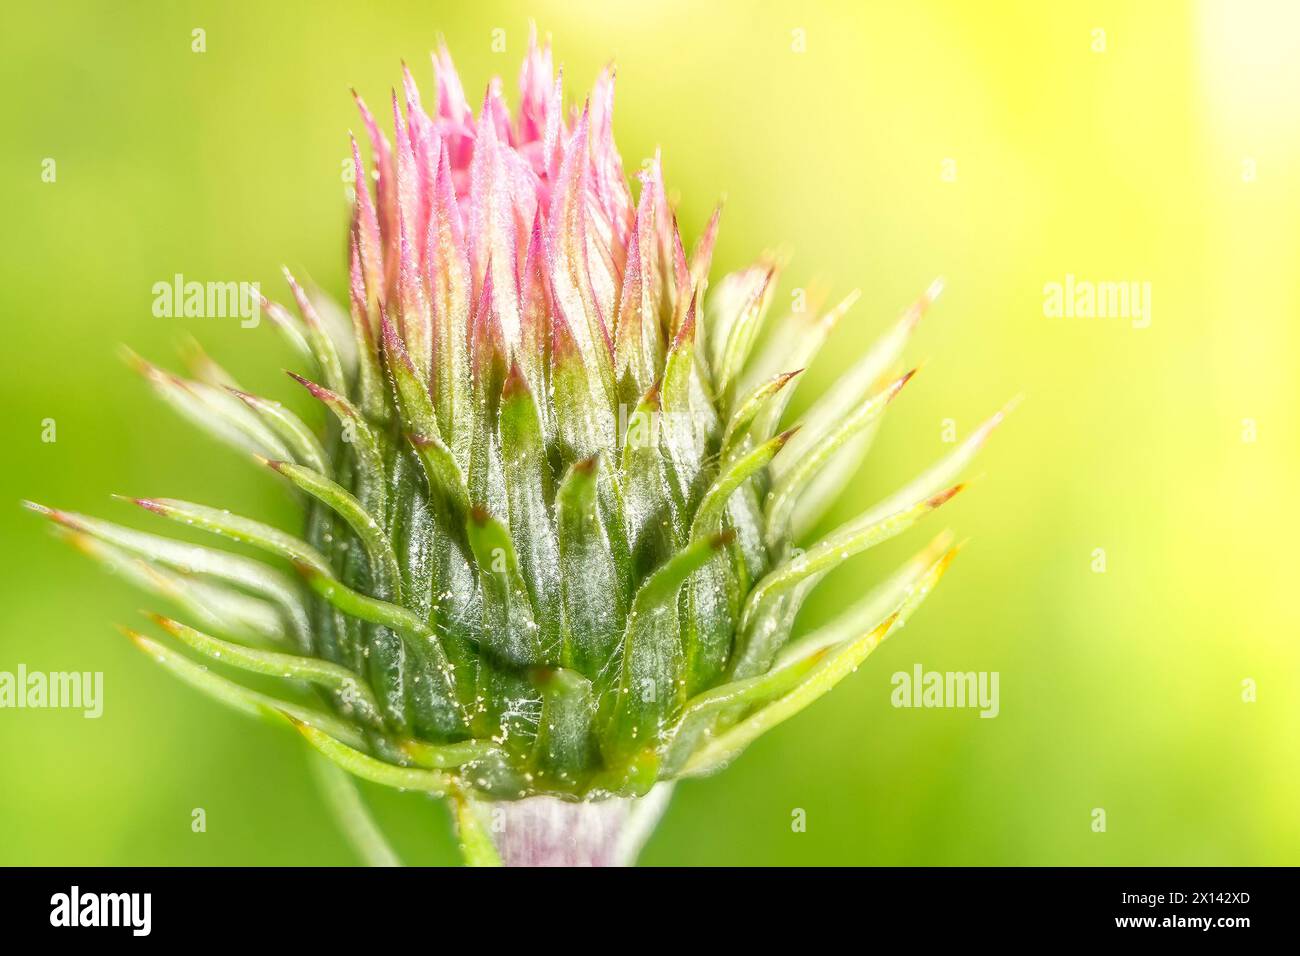 Blooming Marian Thistle, Blessed Milk Thistle (Silybum marianum, Carduus marianus), medicinal plant, healing plant, Mary Thistle, Stock Photo